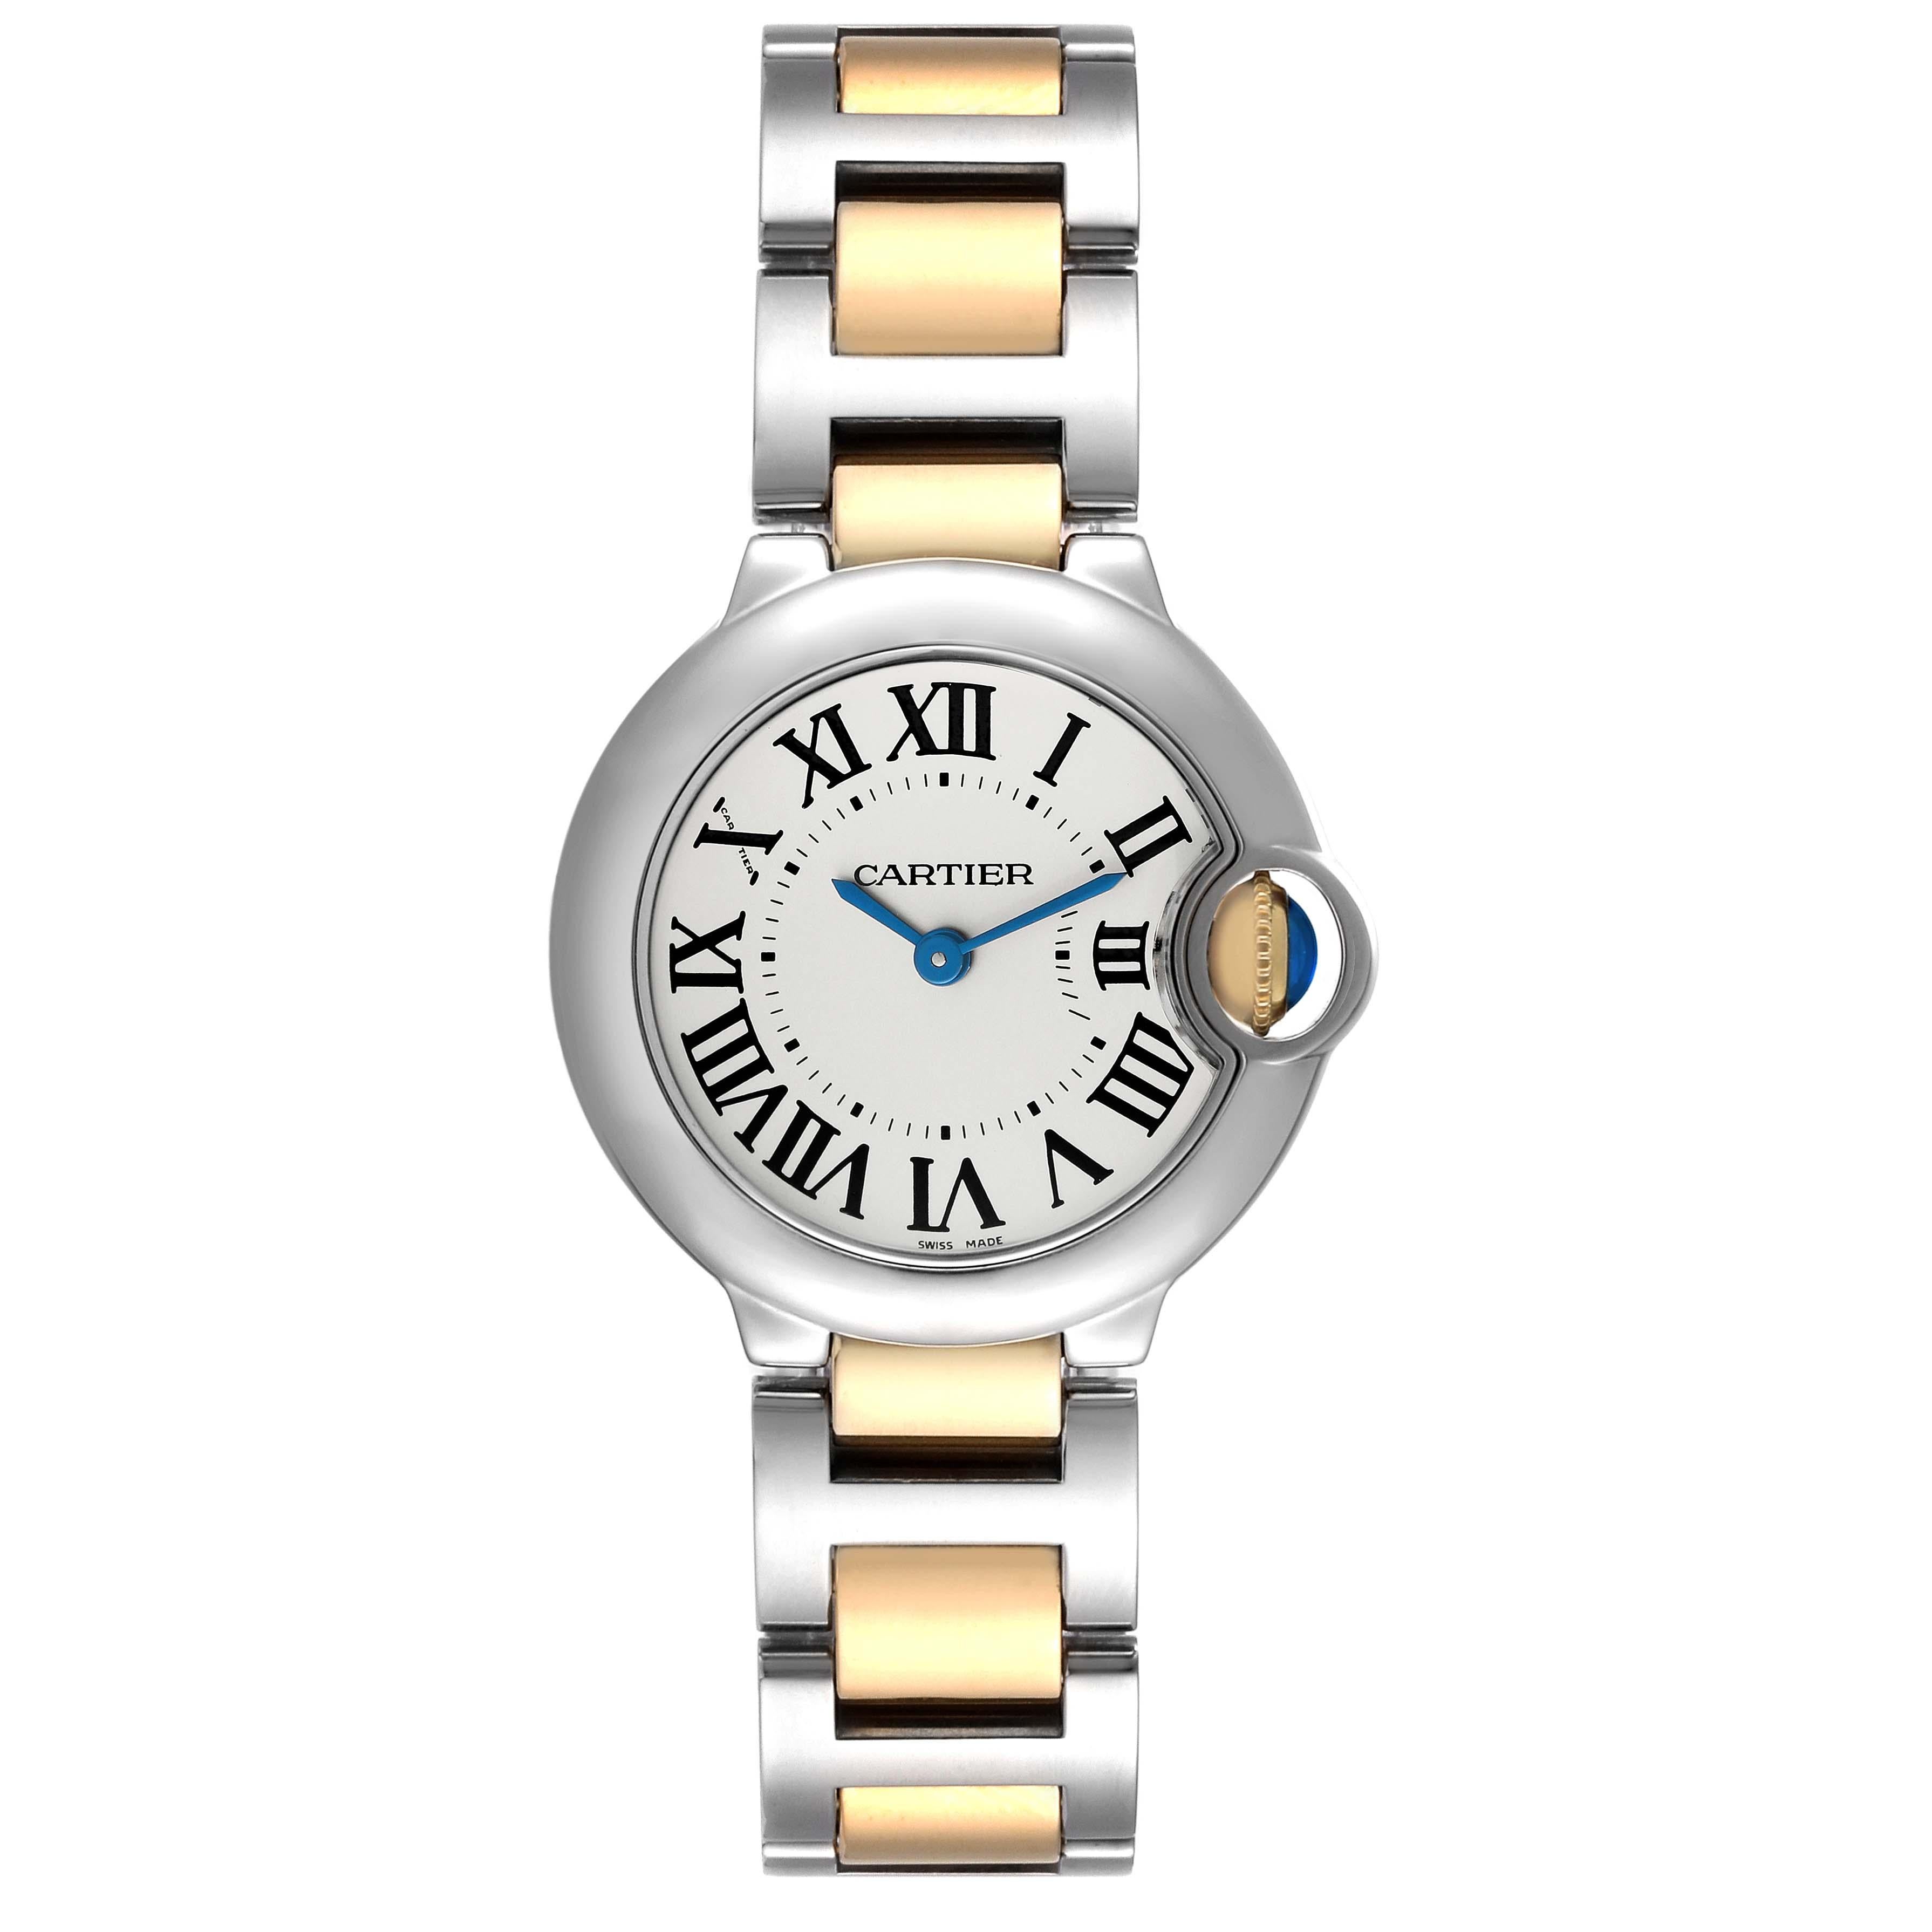 Cartier Ballon Bleu 28mm Steel Yellow Gold Ladies Watch W2BB0010. Quartz movement. Round stainless steel case 28.0 mm in diameter. Fluted 18k crown set with the blue spinel cabochon. . Scratch resistant sapphire crystal. Silvered white opaline dial